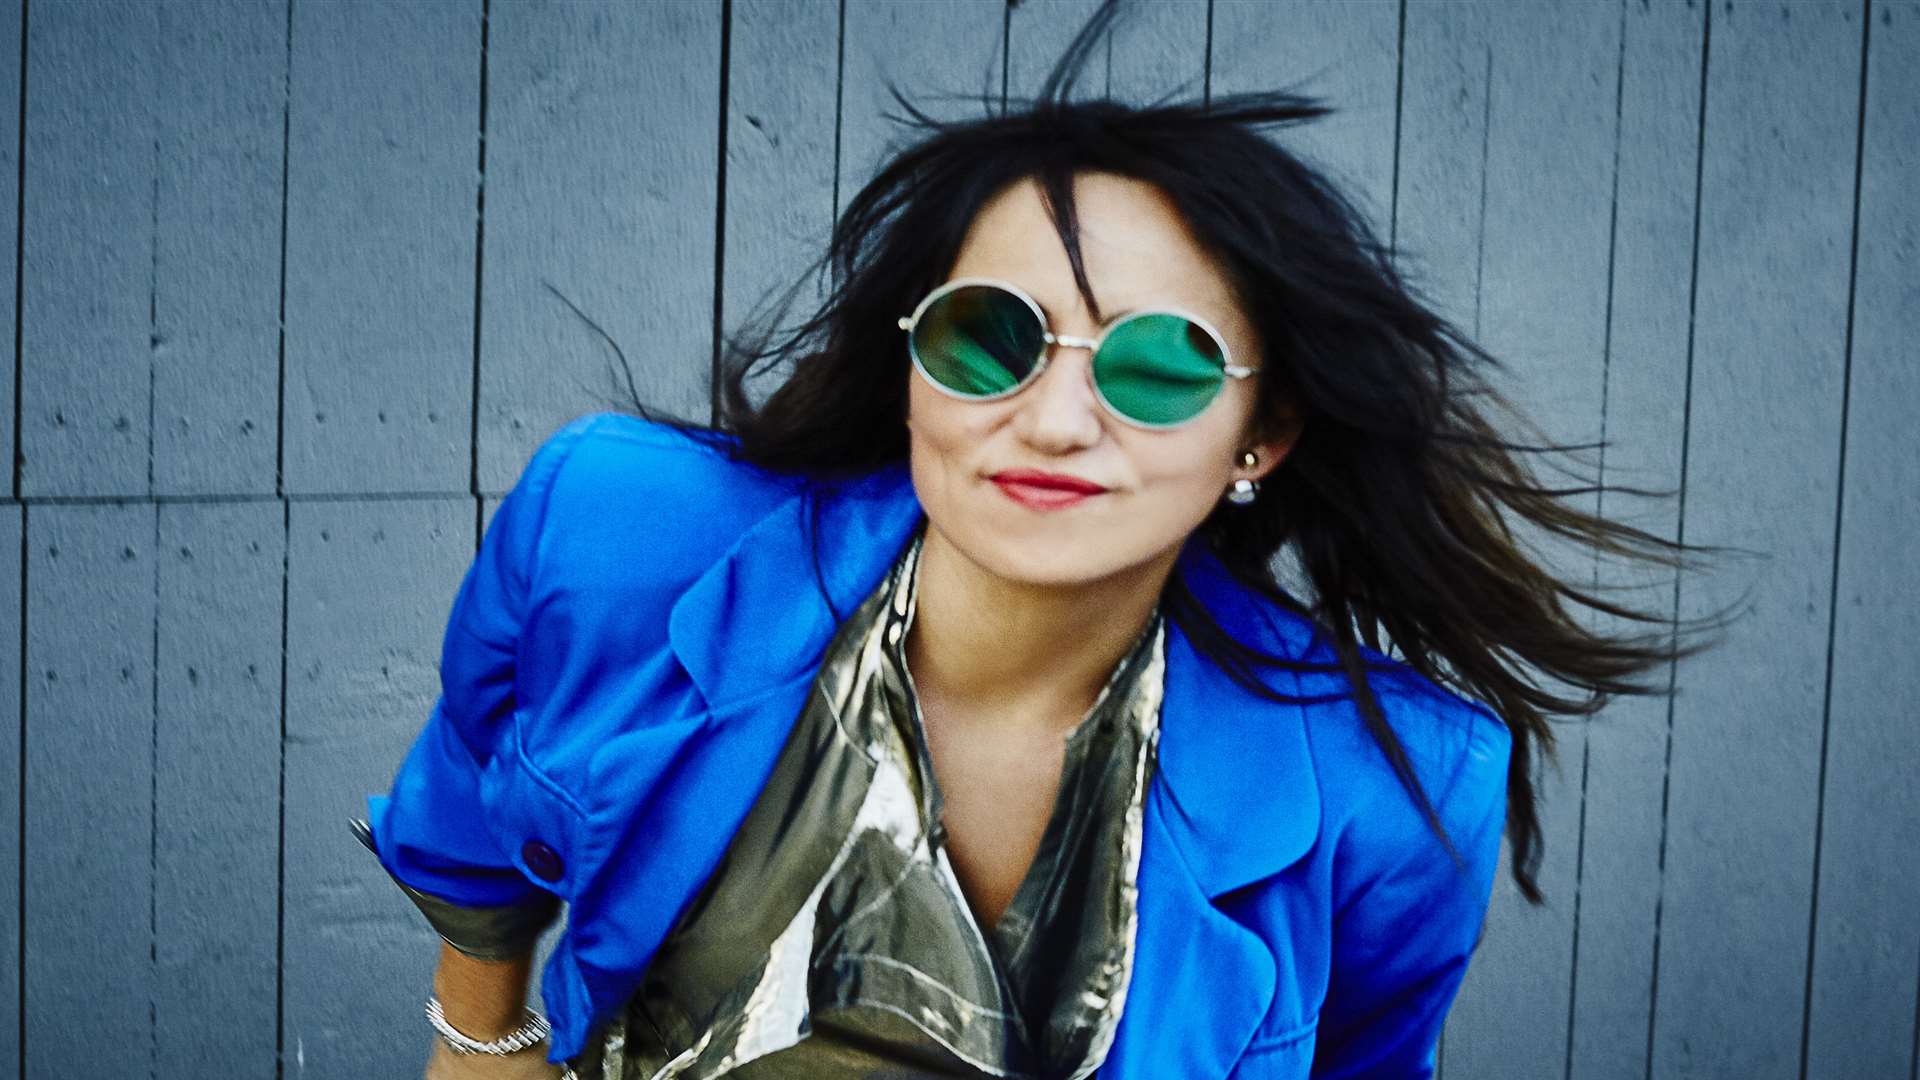 KT Tunstall will play the Kent Event Centre in the summer